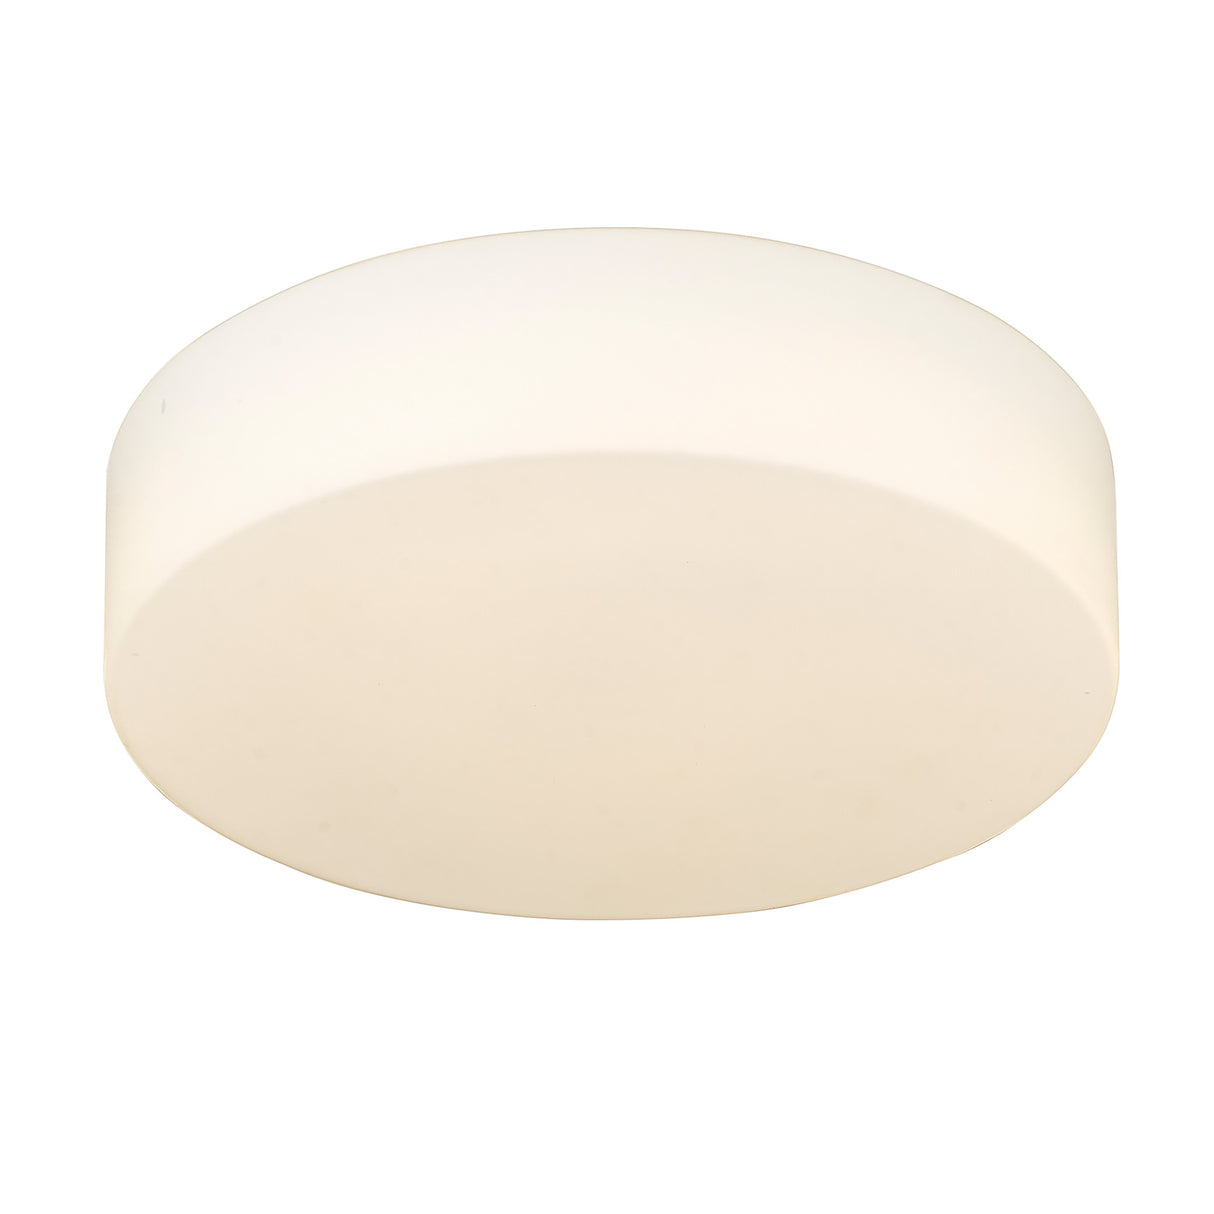 Toli BCB Flush Mount in Brushed Champagne Bronze with Opal Glass Shade